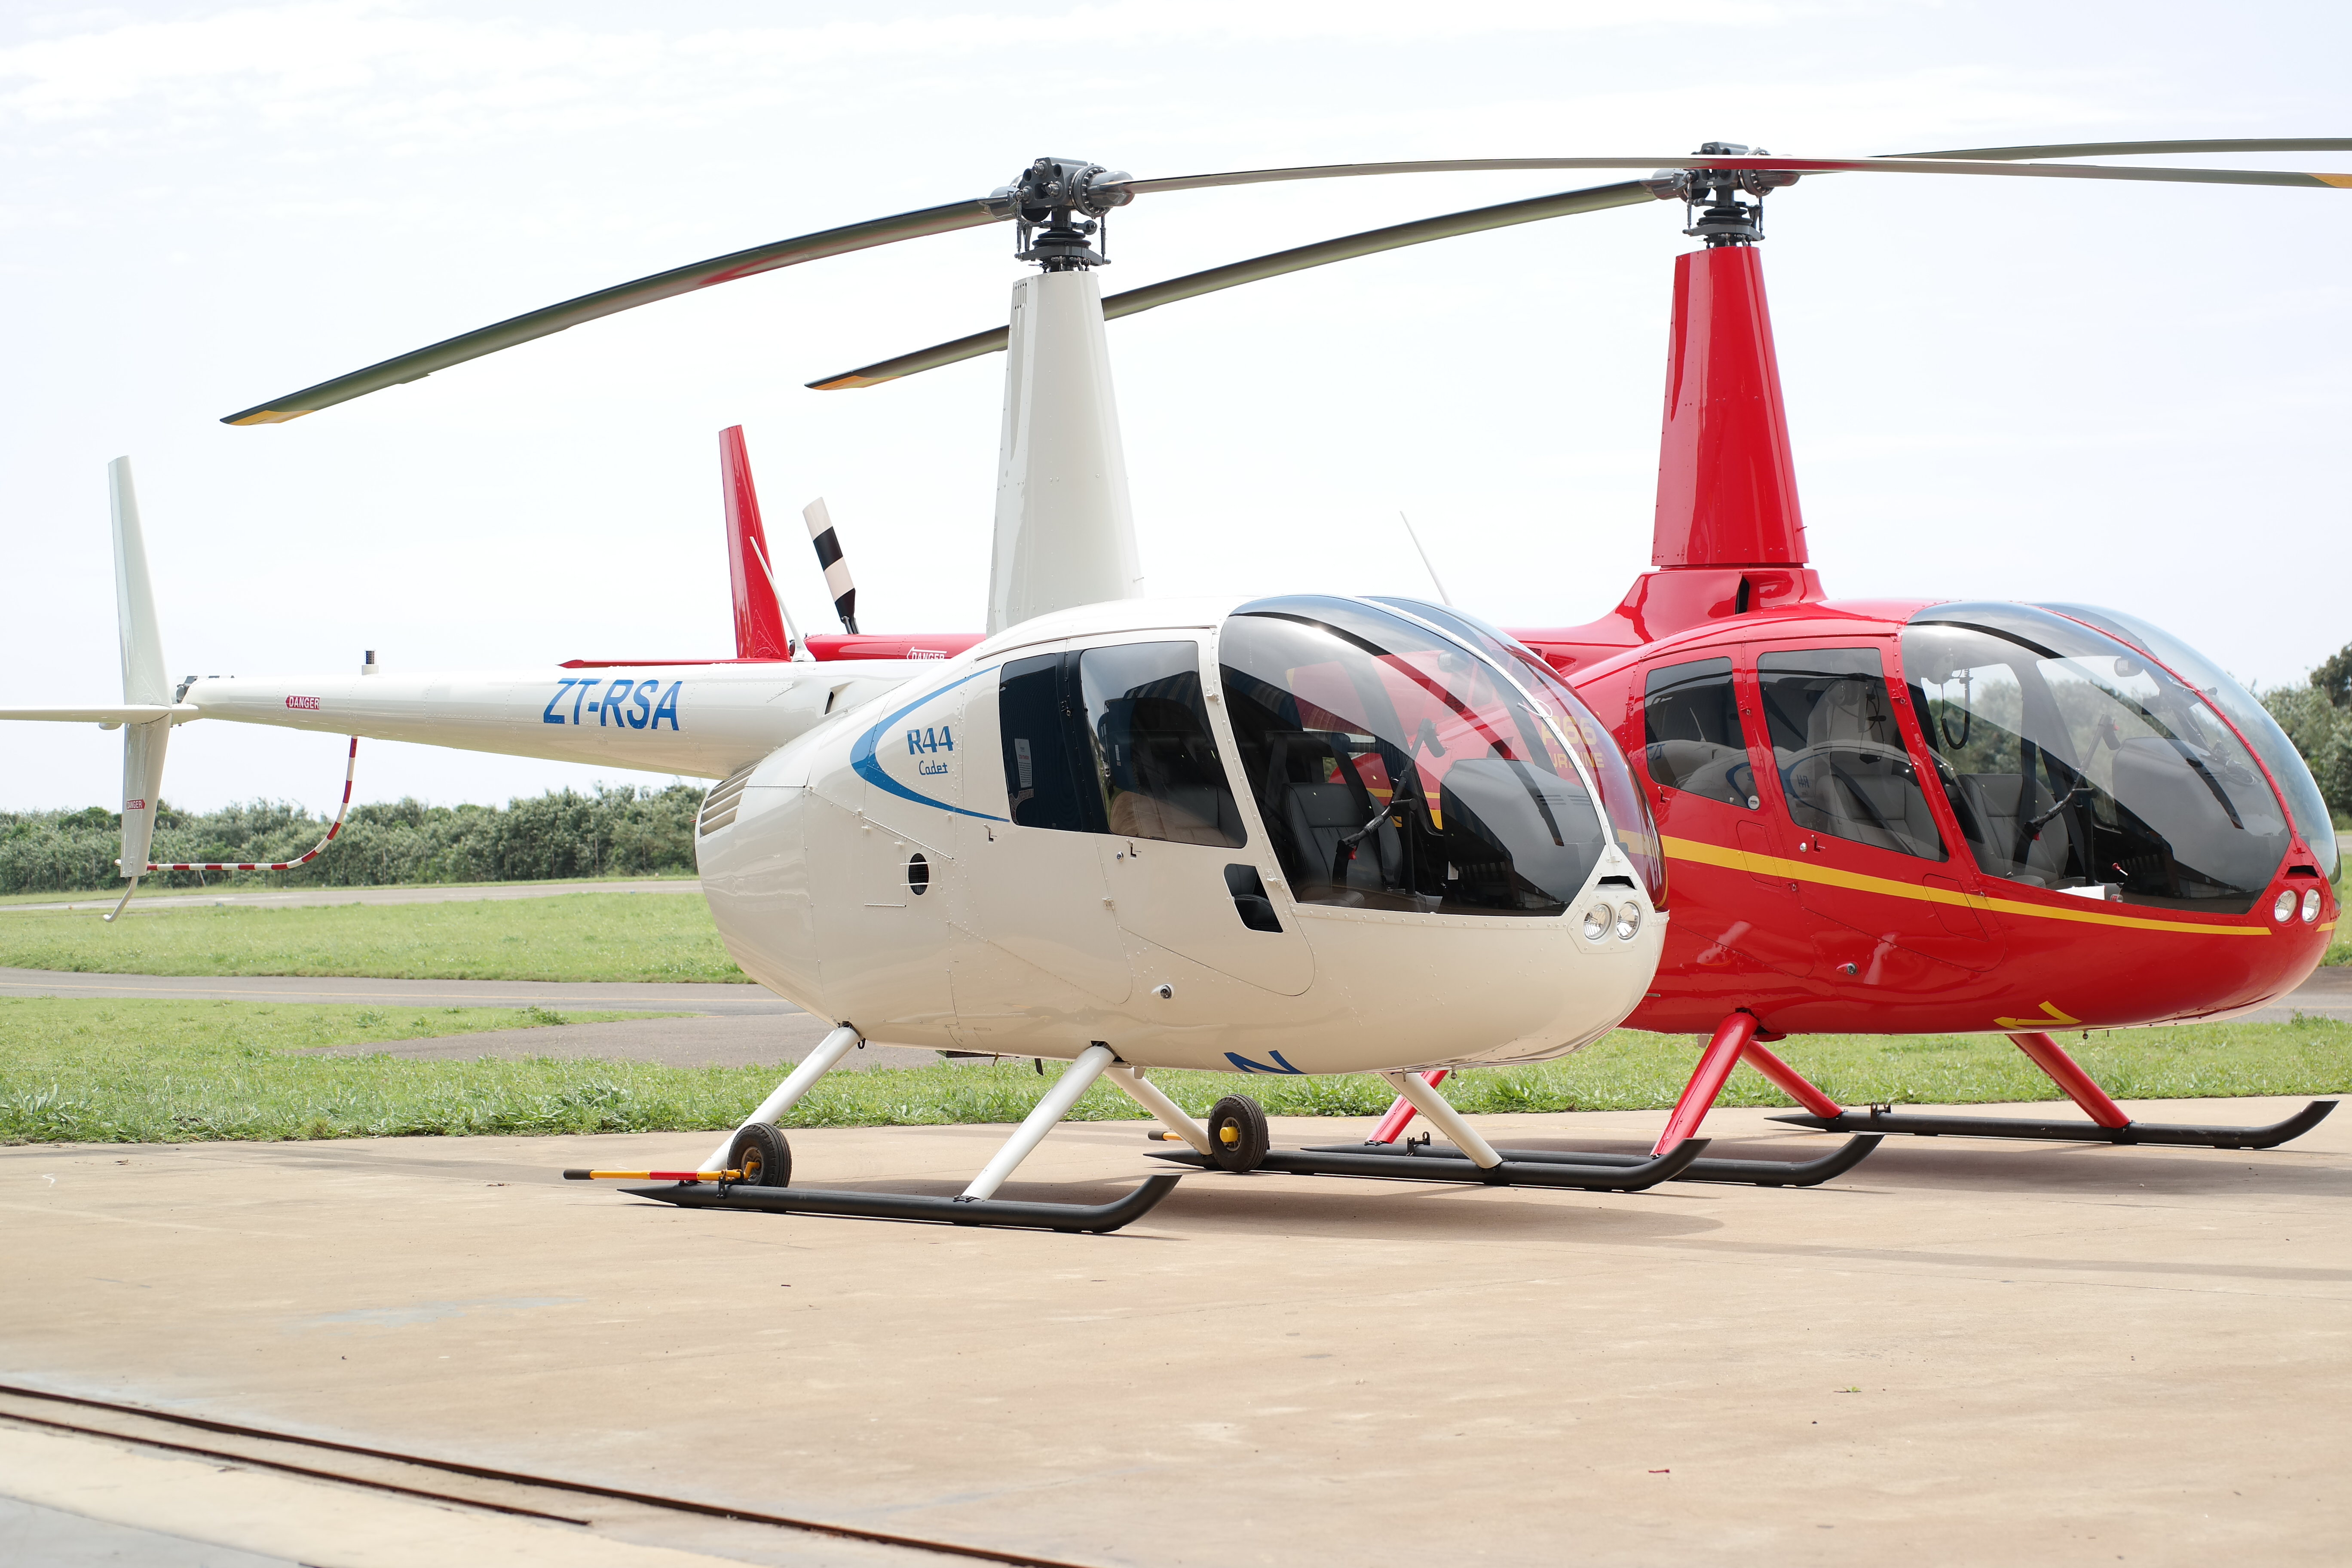 Two Robinson helicopters rest on the ground